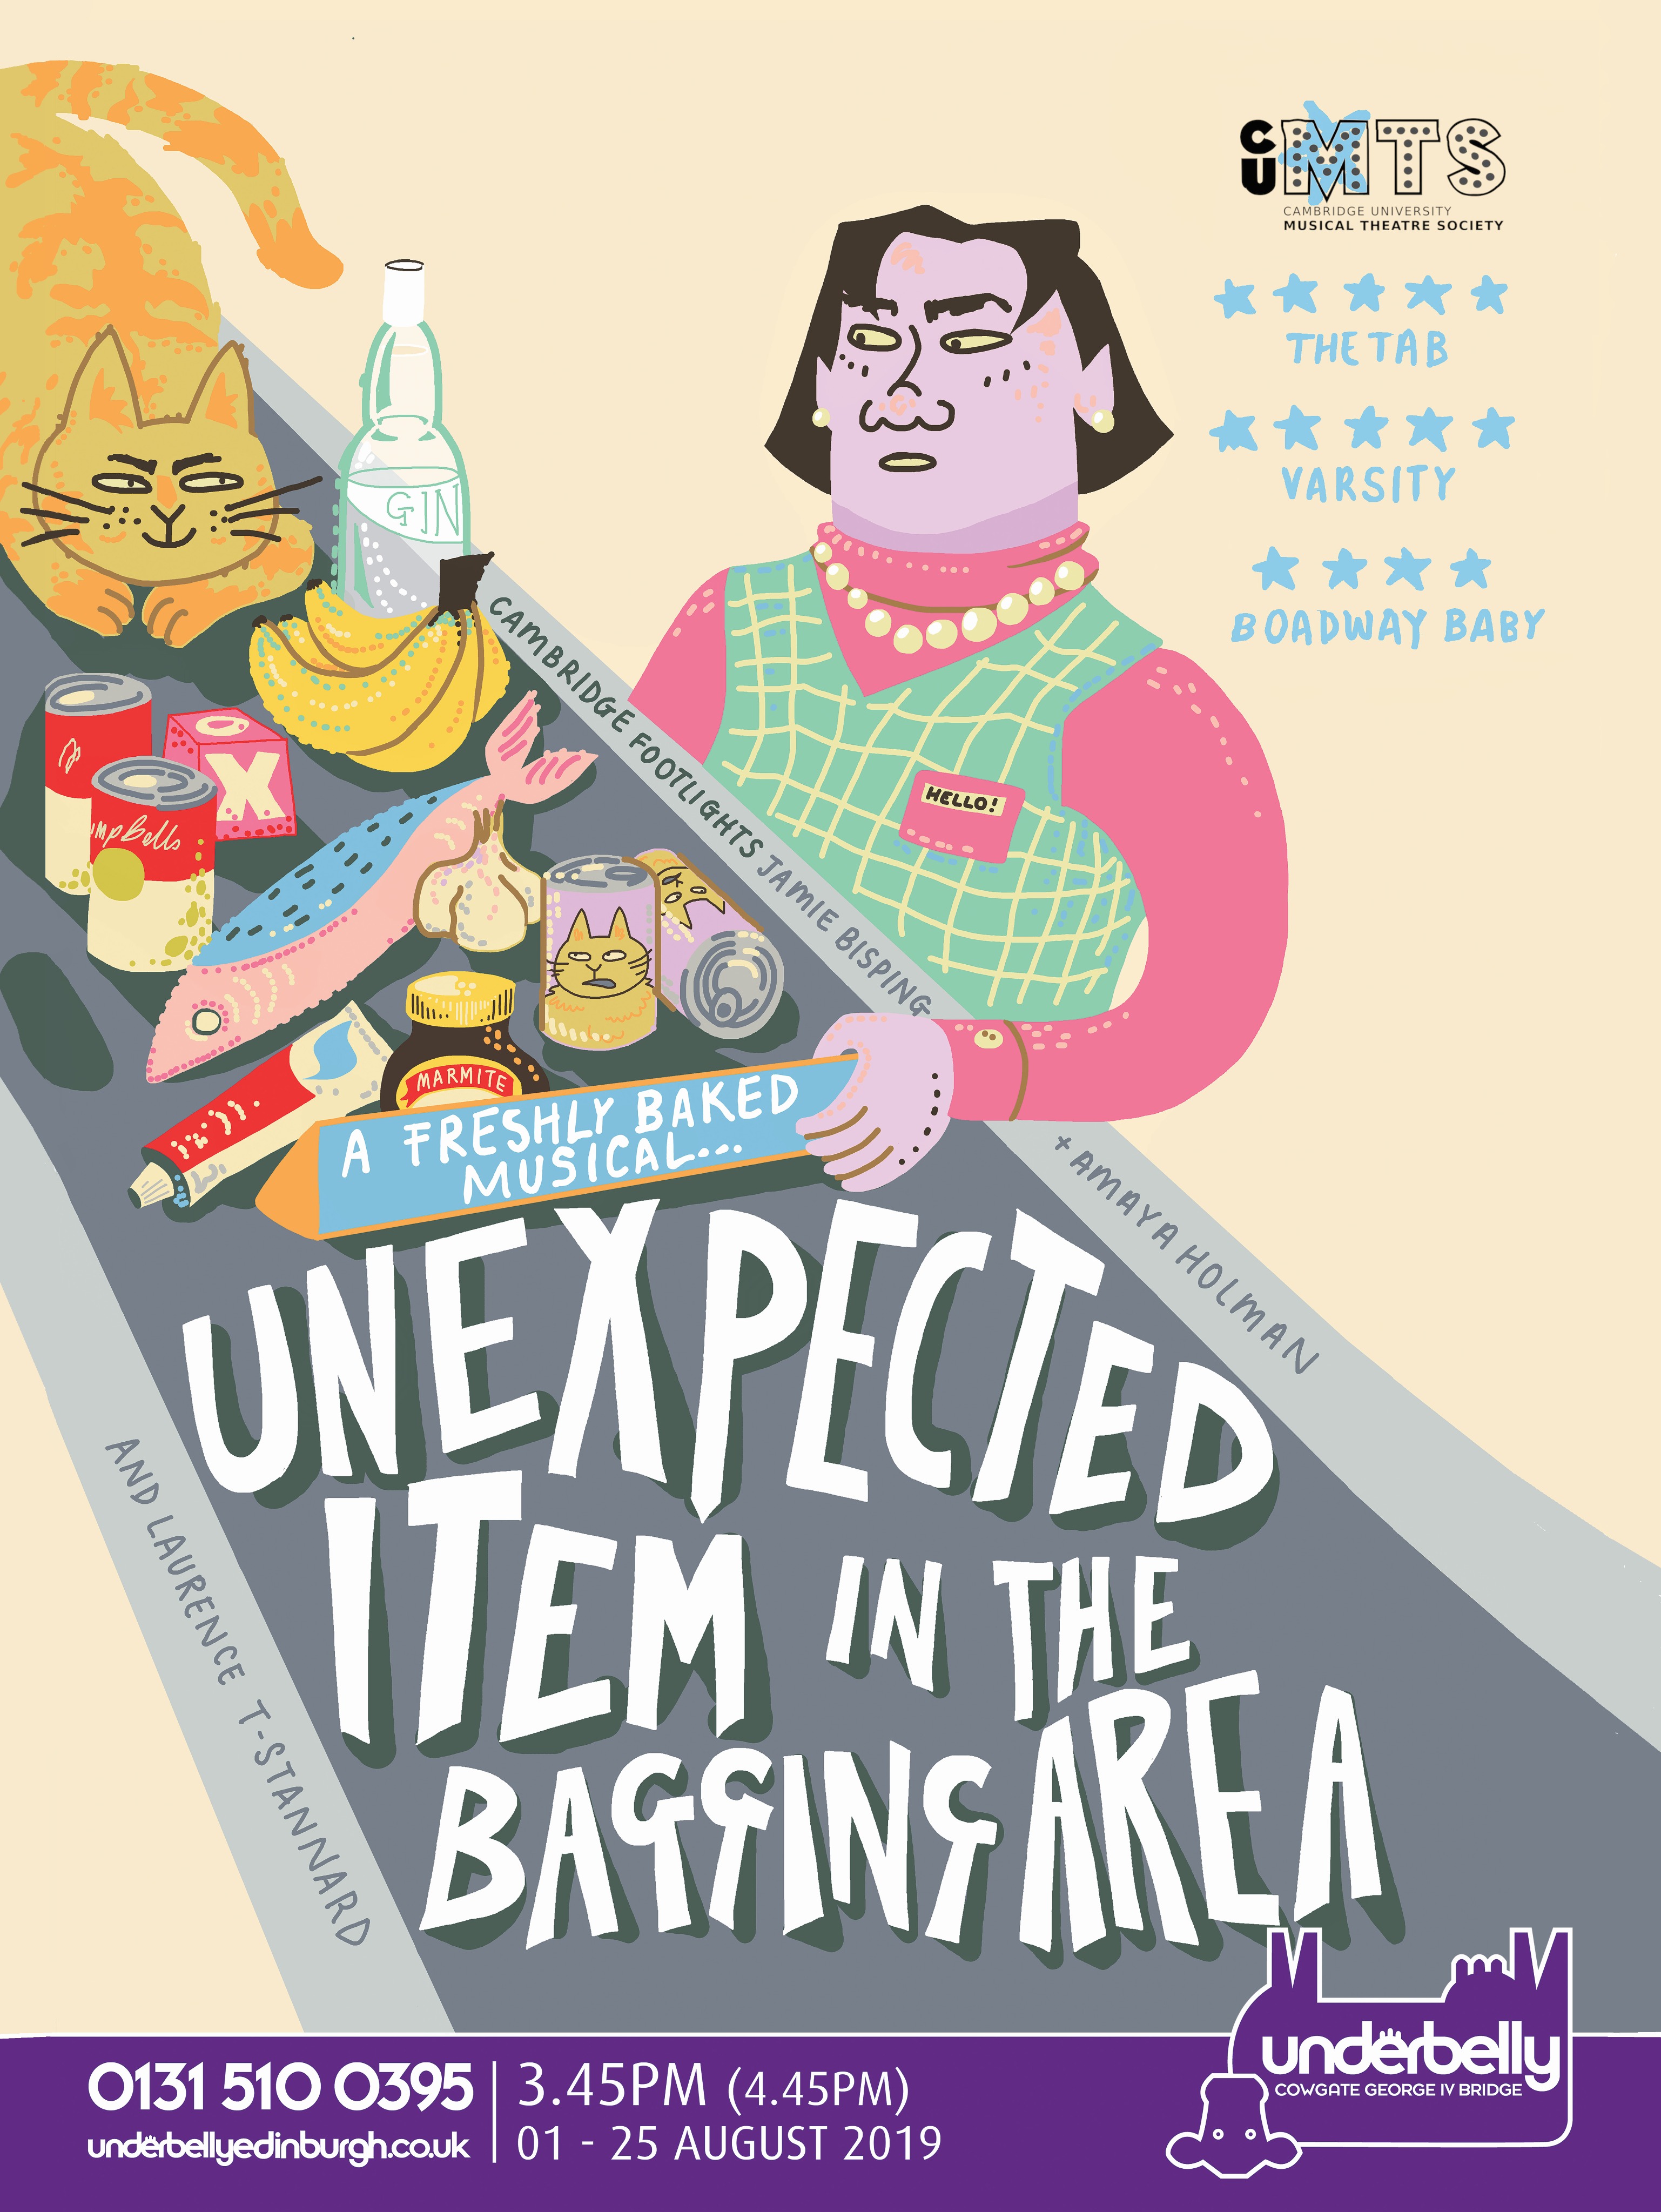 The poster for Unexpected Item in the Bagging Area